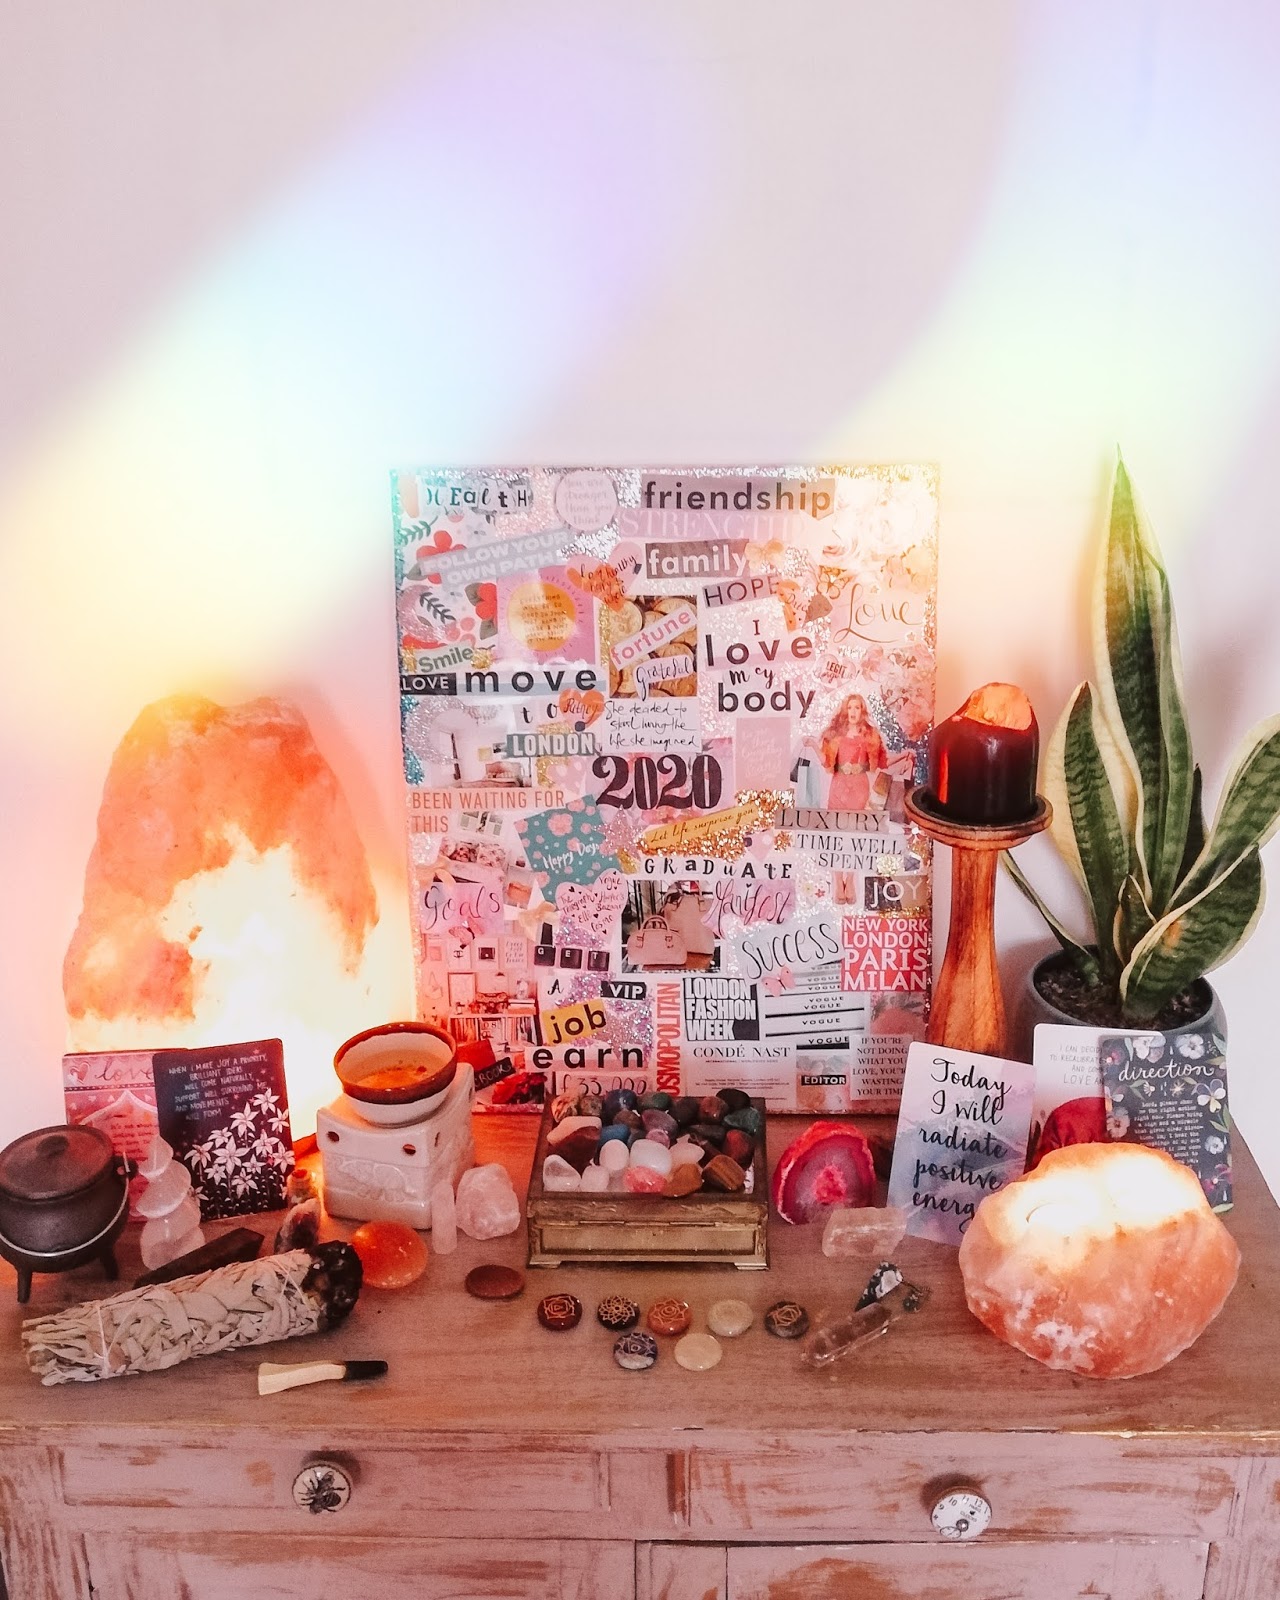 How to make a vision board?, My first vision board!, DIY, Law of  attraction